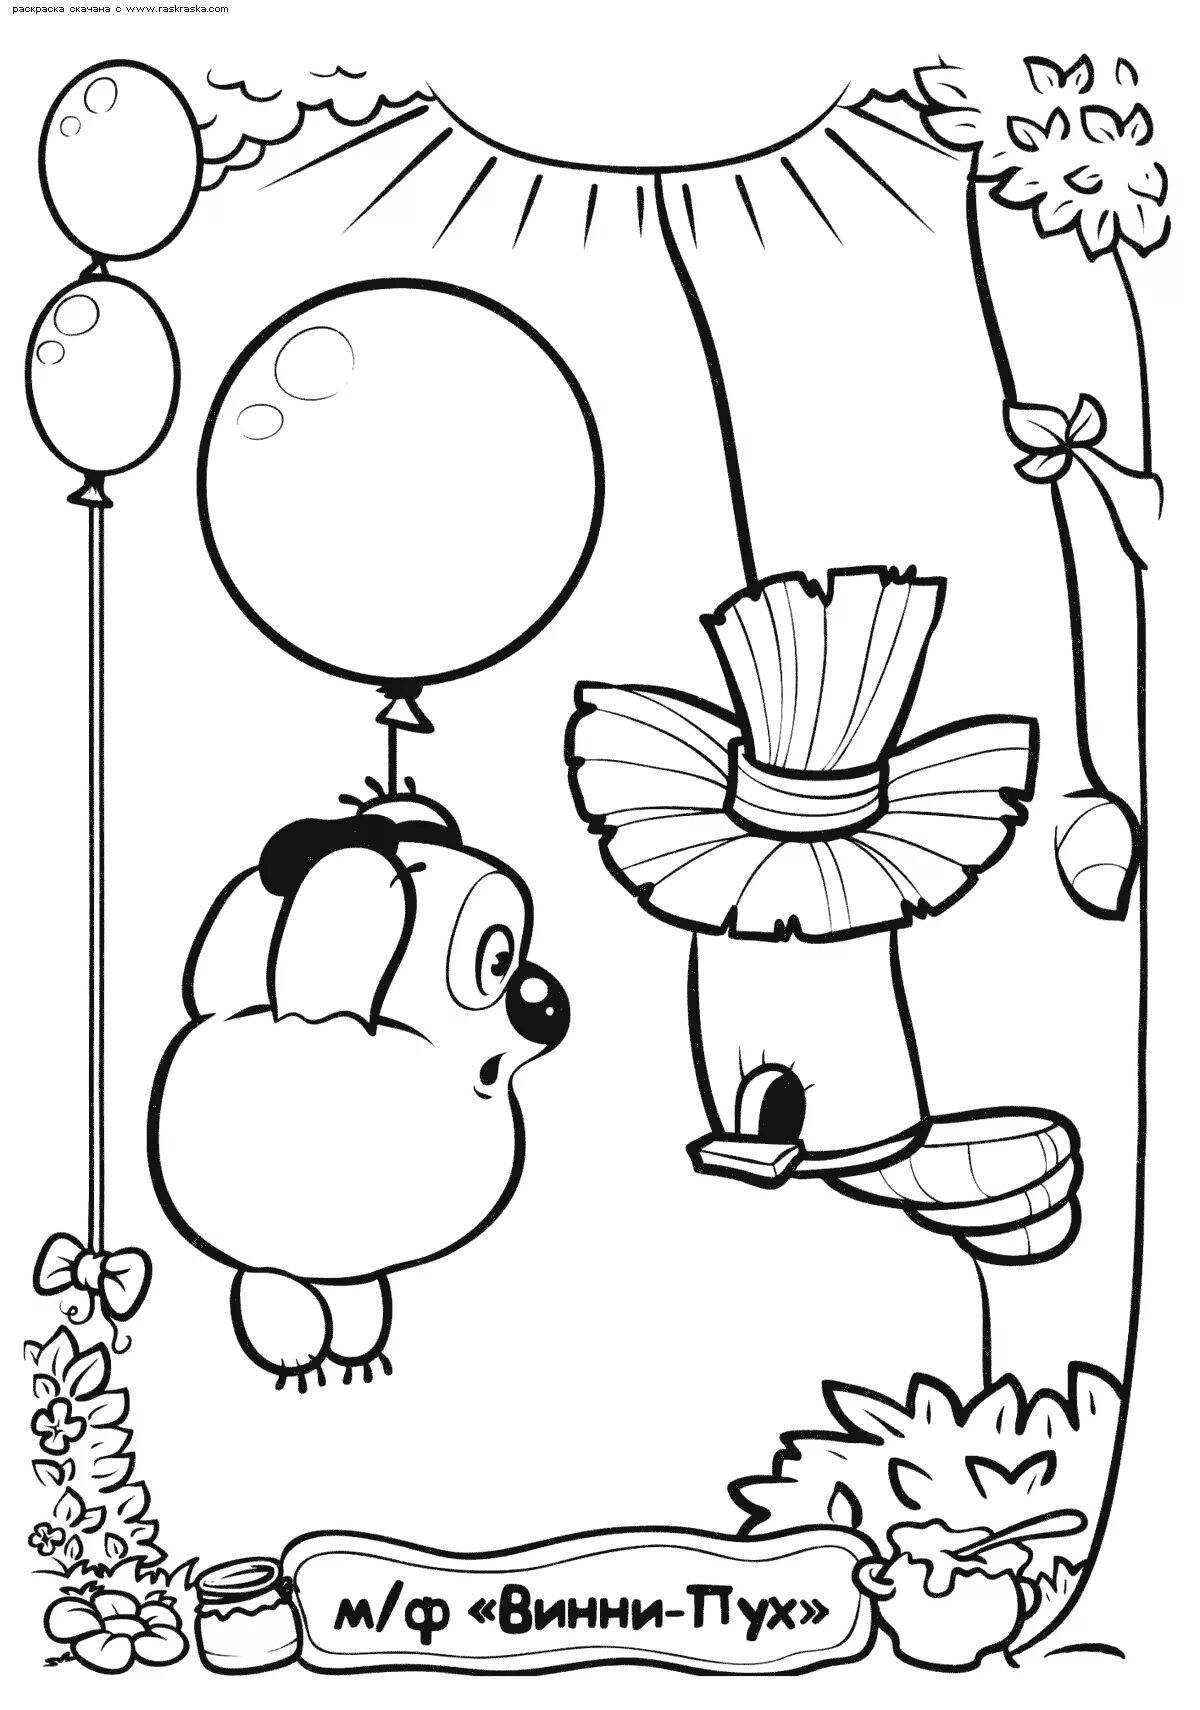 Fancy pig and winnipoo coloring page